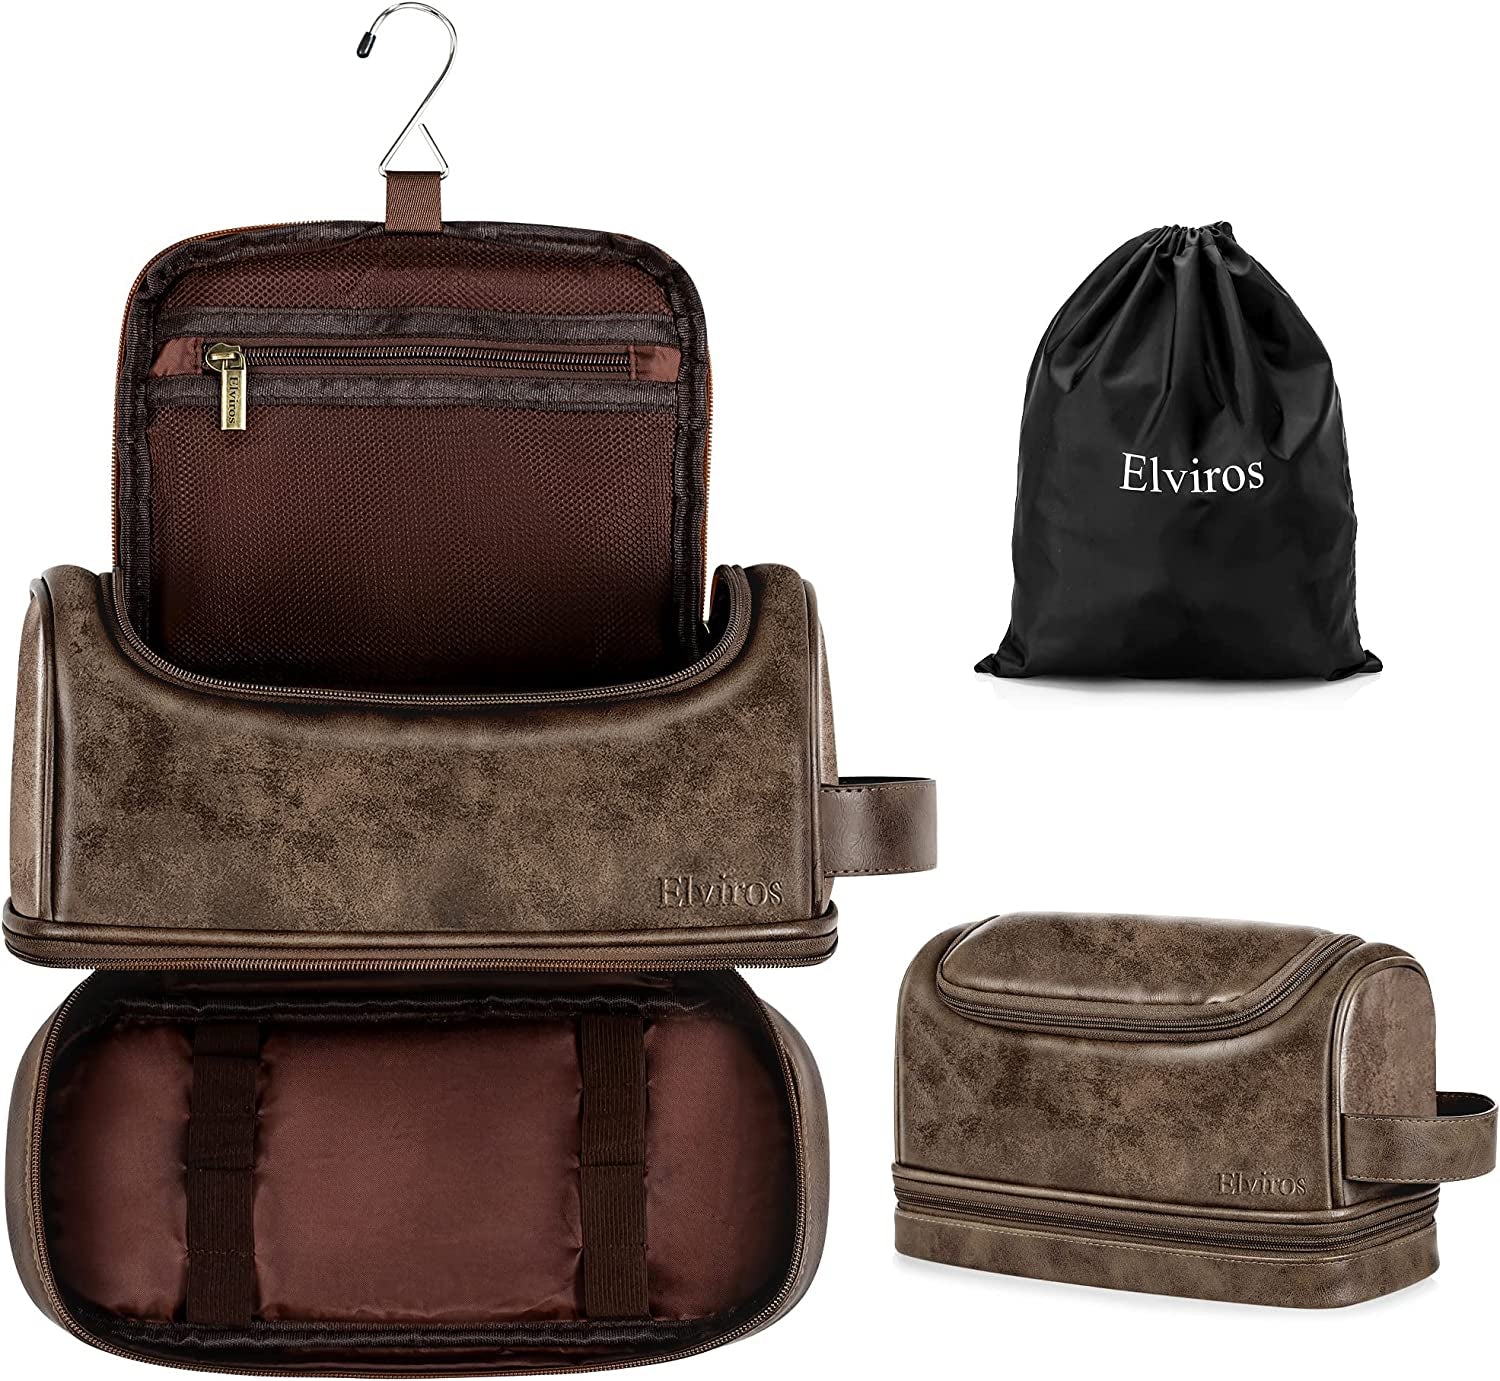 "Travel in Style with Elviros Toiletry Bag - Premium Leather Organizer Kit with Hanging Hook for Men and Women - Spacious and Water-Resistant - Perfect for Bathroom Shaving Essentials (Dark Brown)"